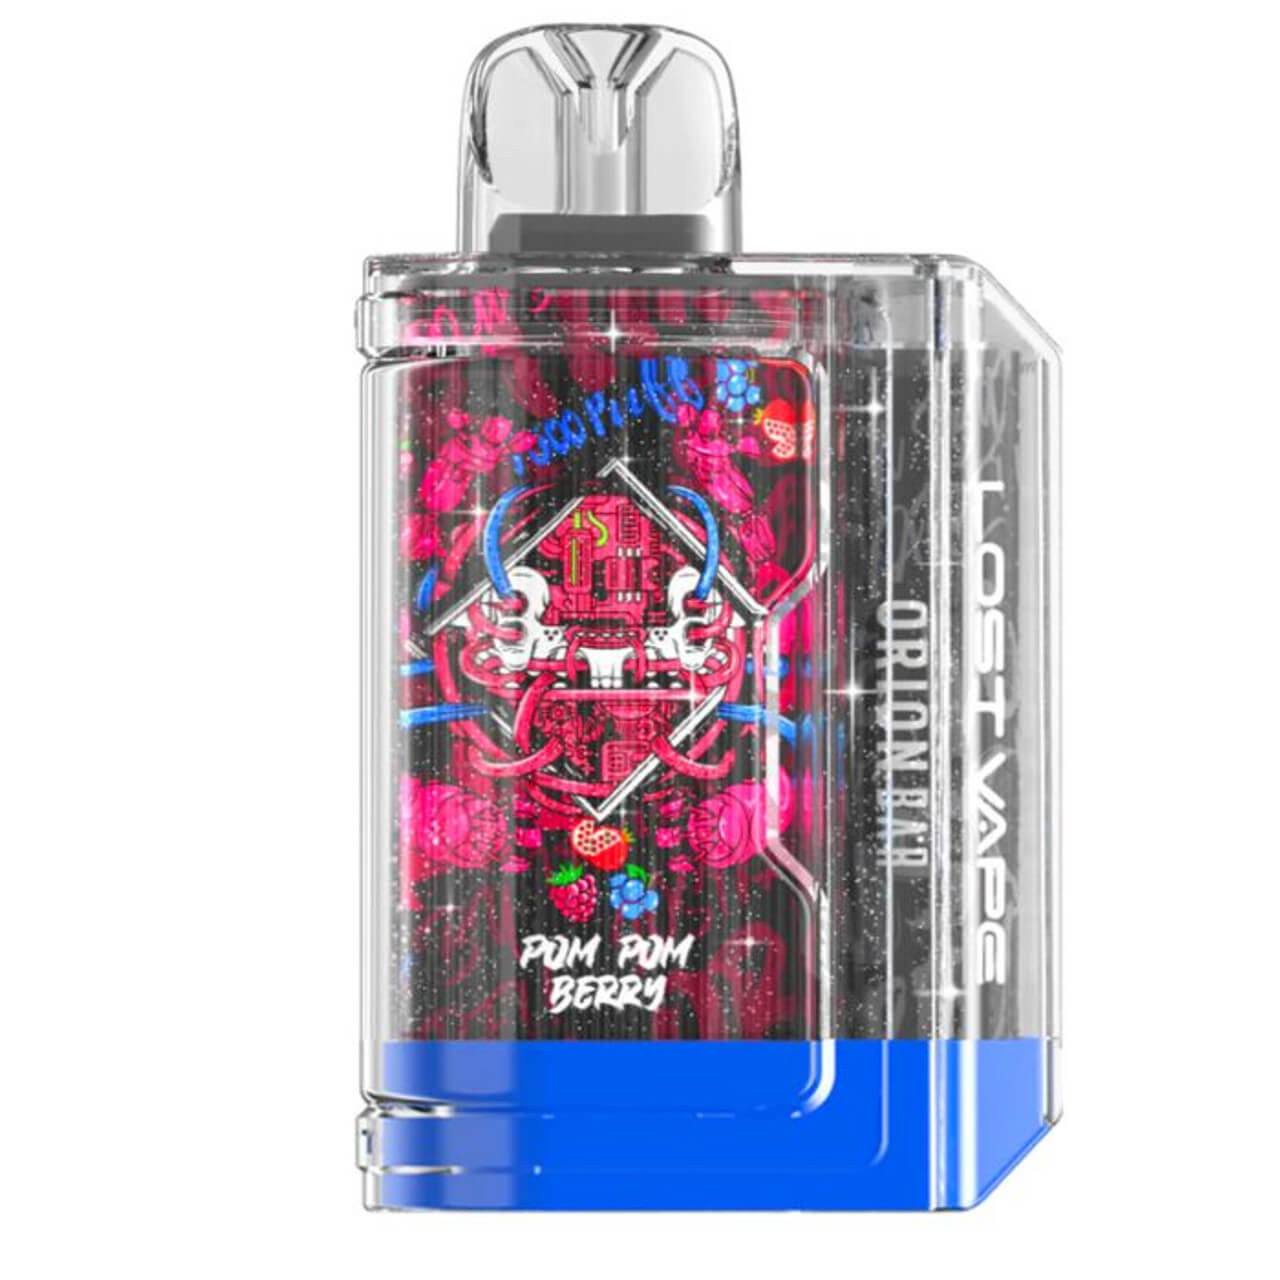 Lost Vape Orion Bar Disposable Device (7500 Puffs)-Pom Pom Berry